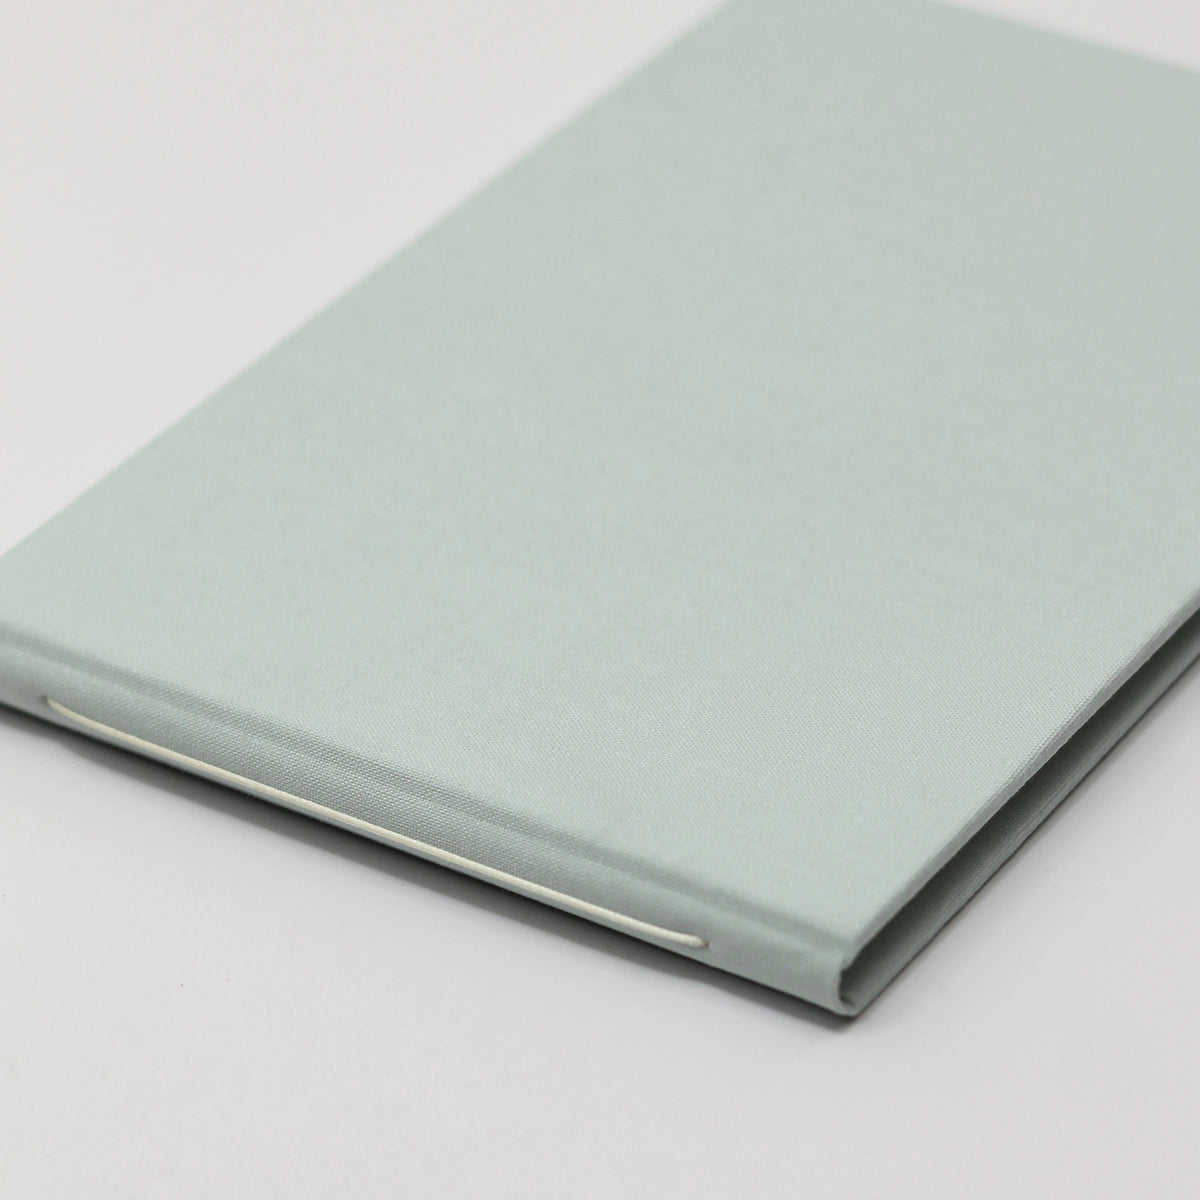 Guestbook with Pastel Blue Cotton Cover